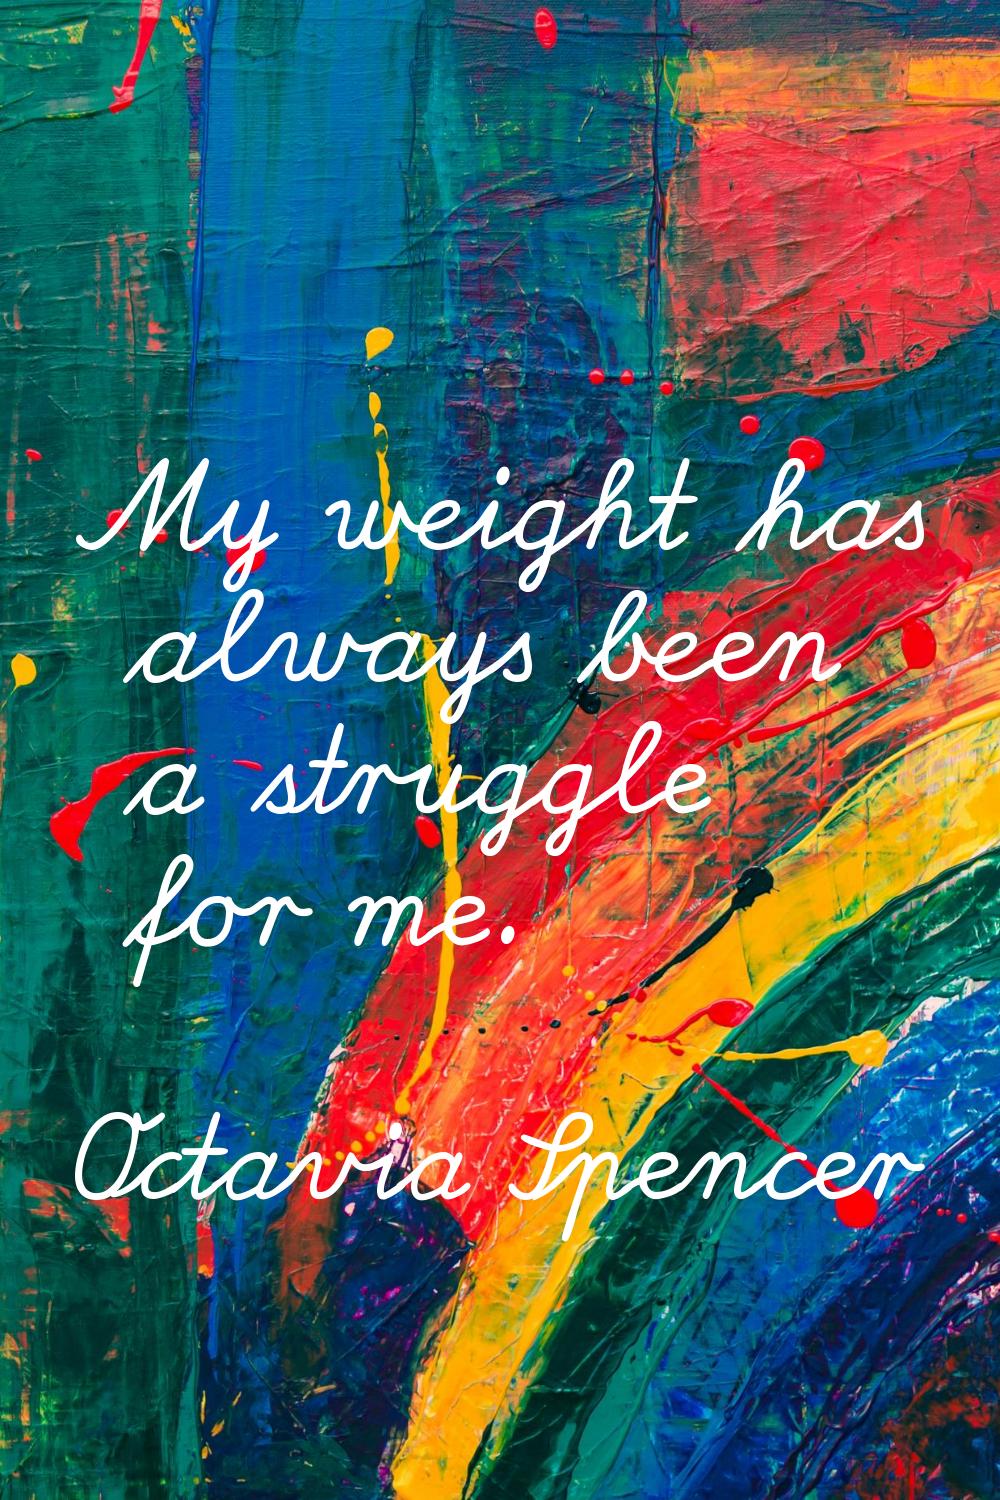 My weight has always been a struggle for me.